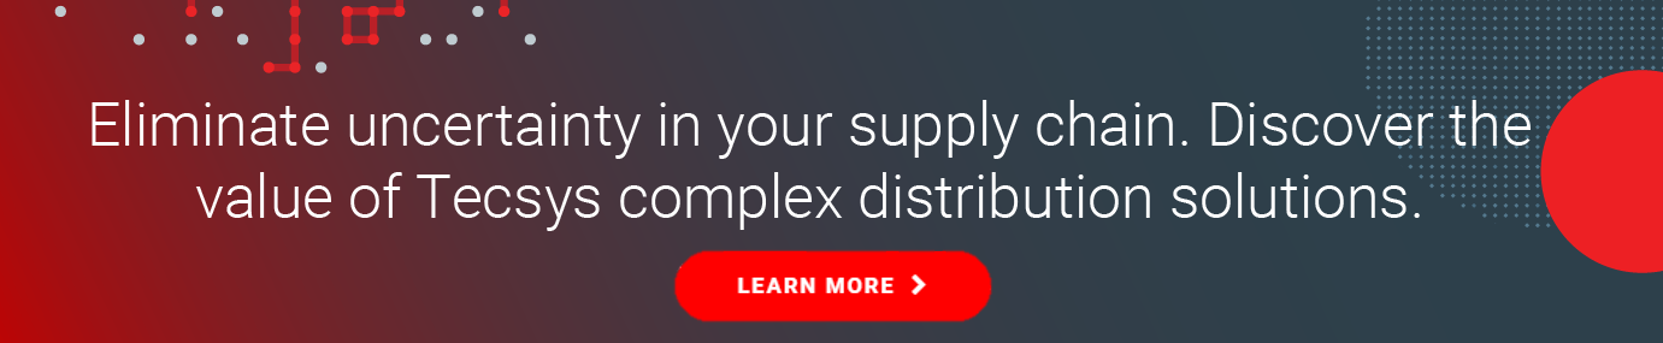 Elimate uncertainty in your supply chain. Discover the value of Tecsys complex distribution solutions.